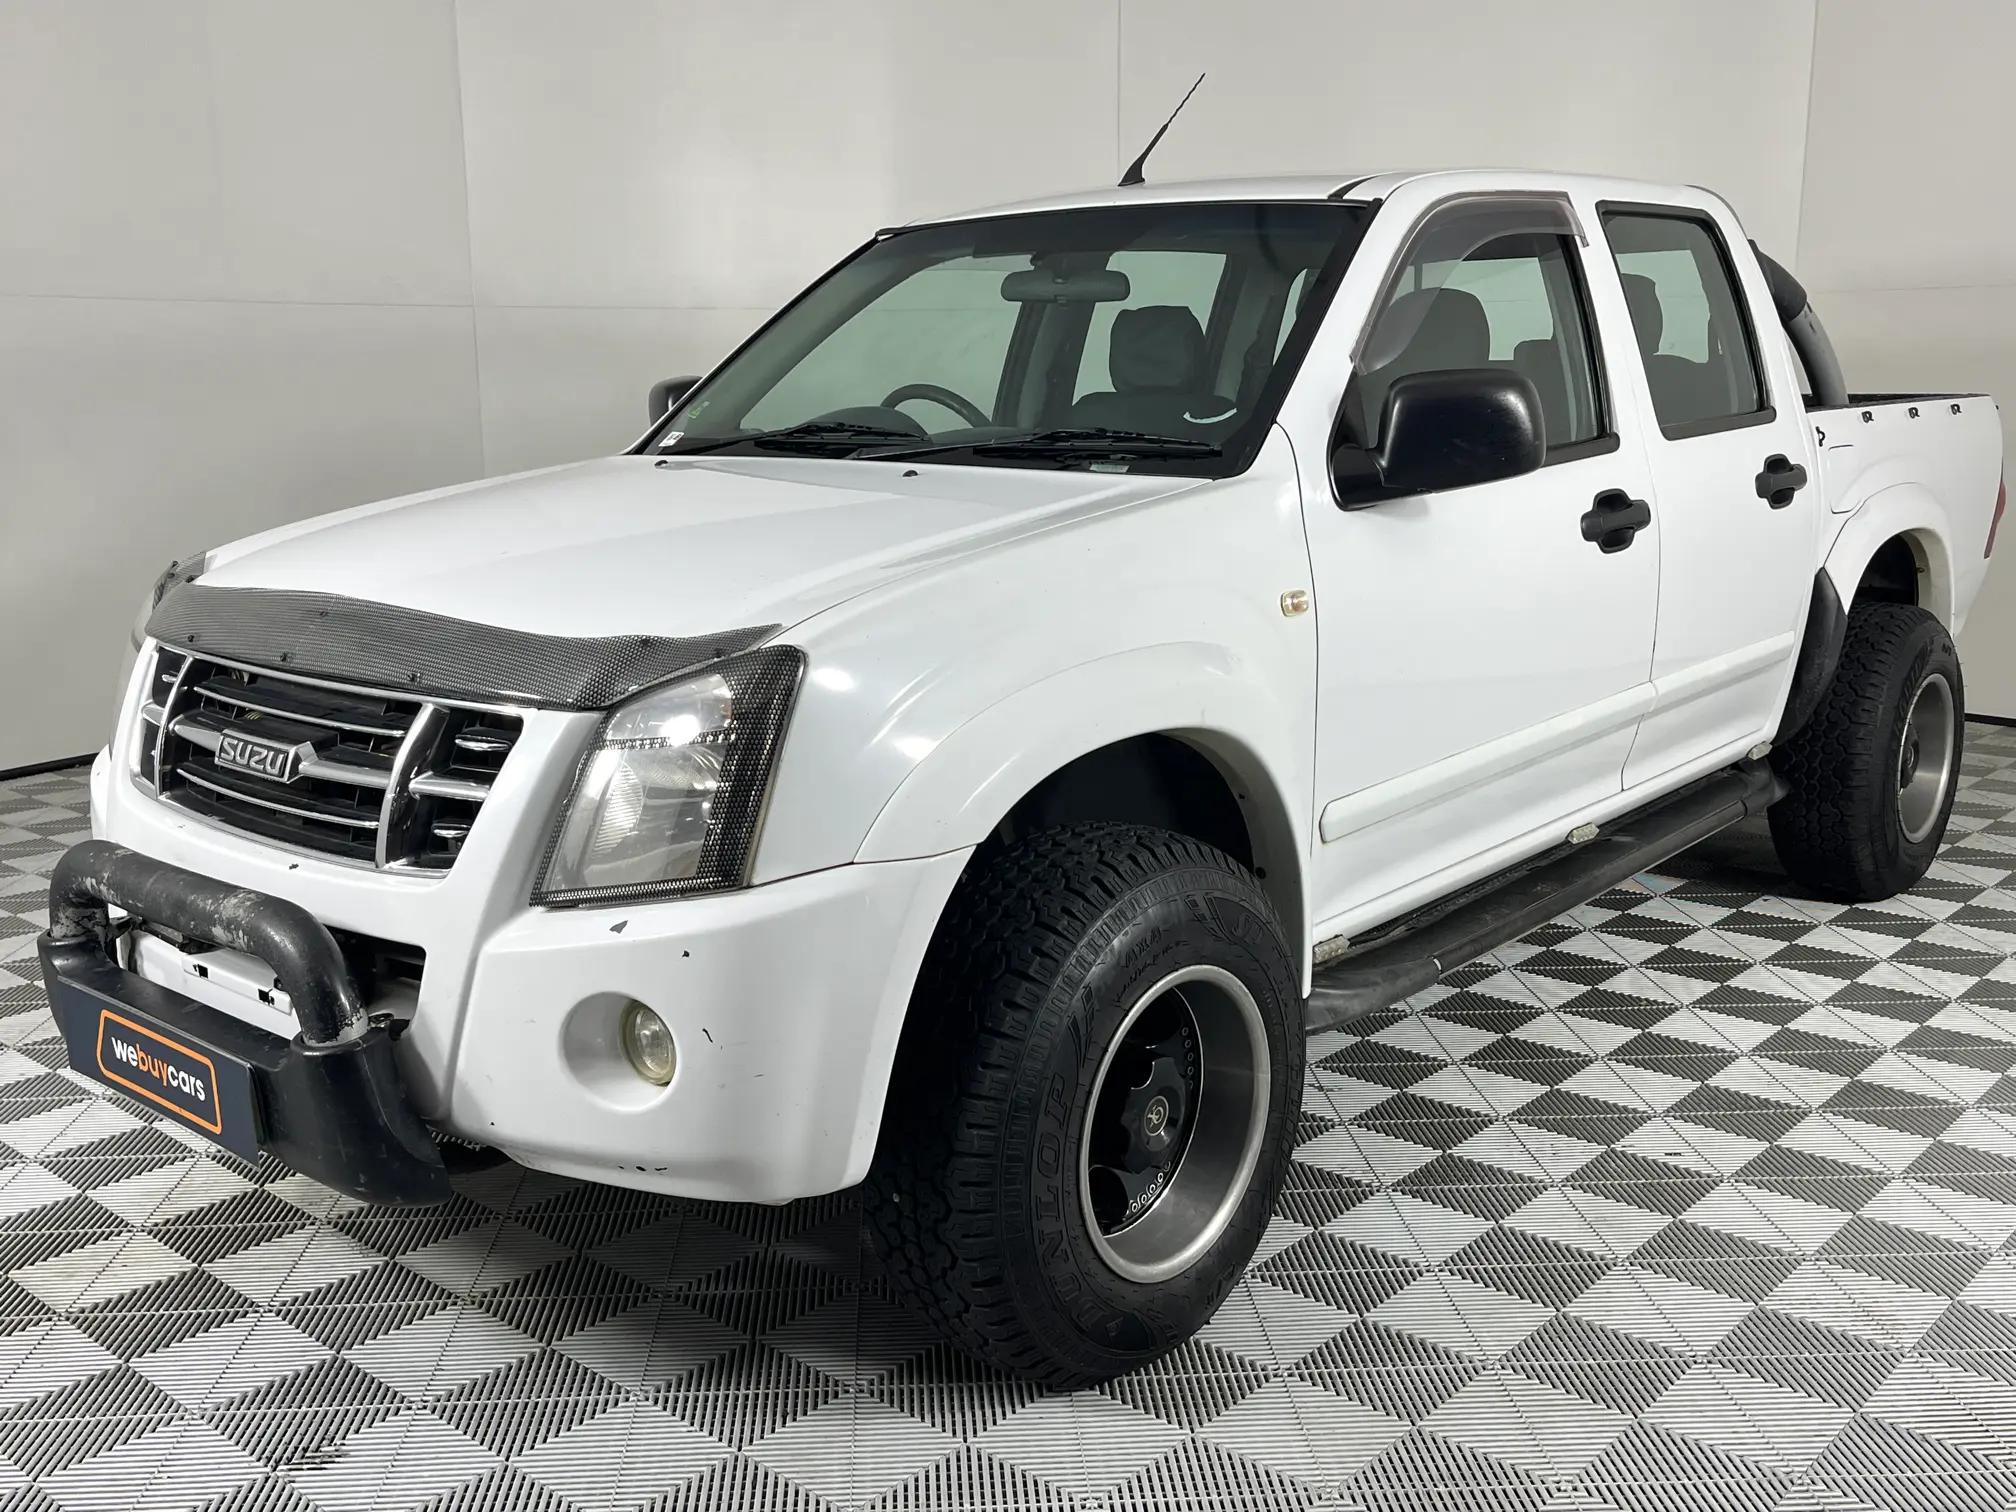 Isuzu KB 250 D-TEQ LE Double Cab for sale - R 125 900 | Carfind.co.za